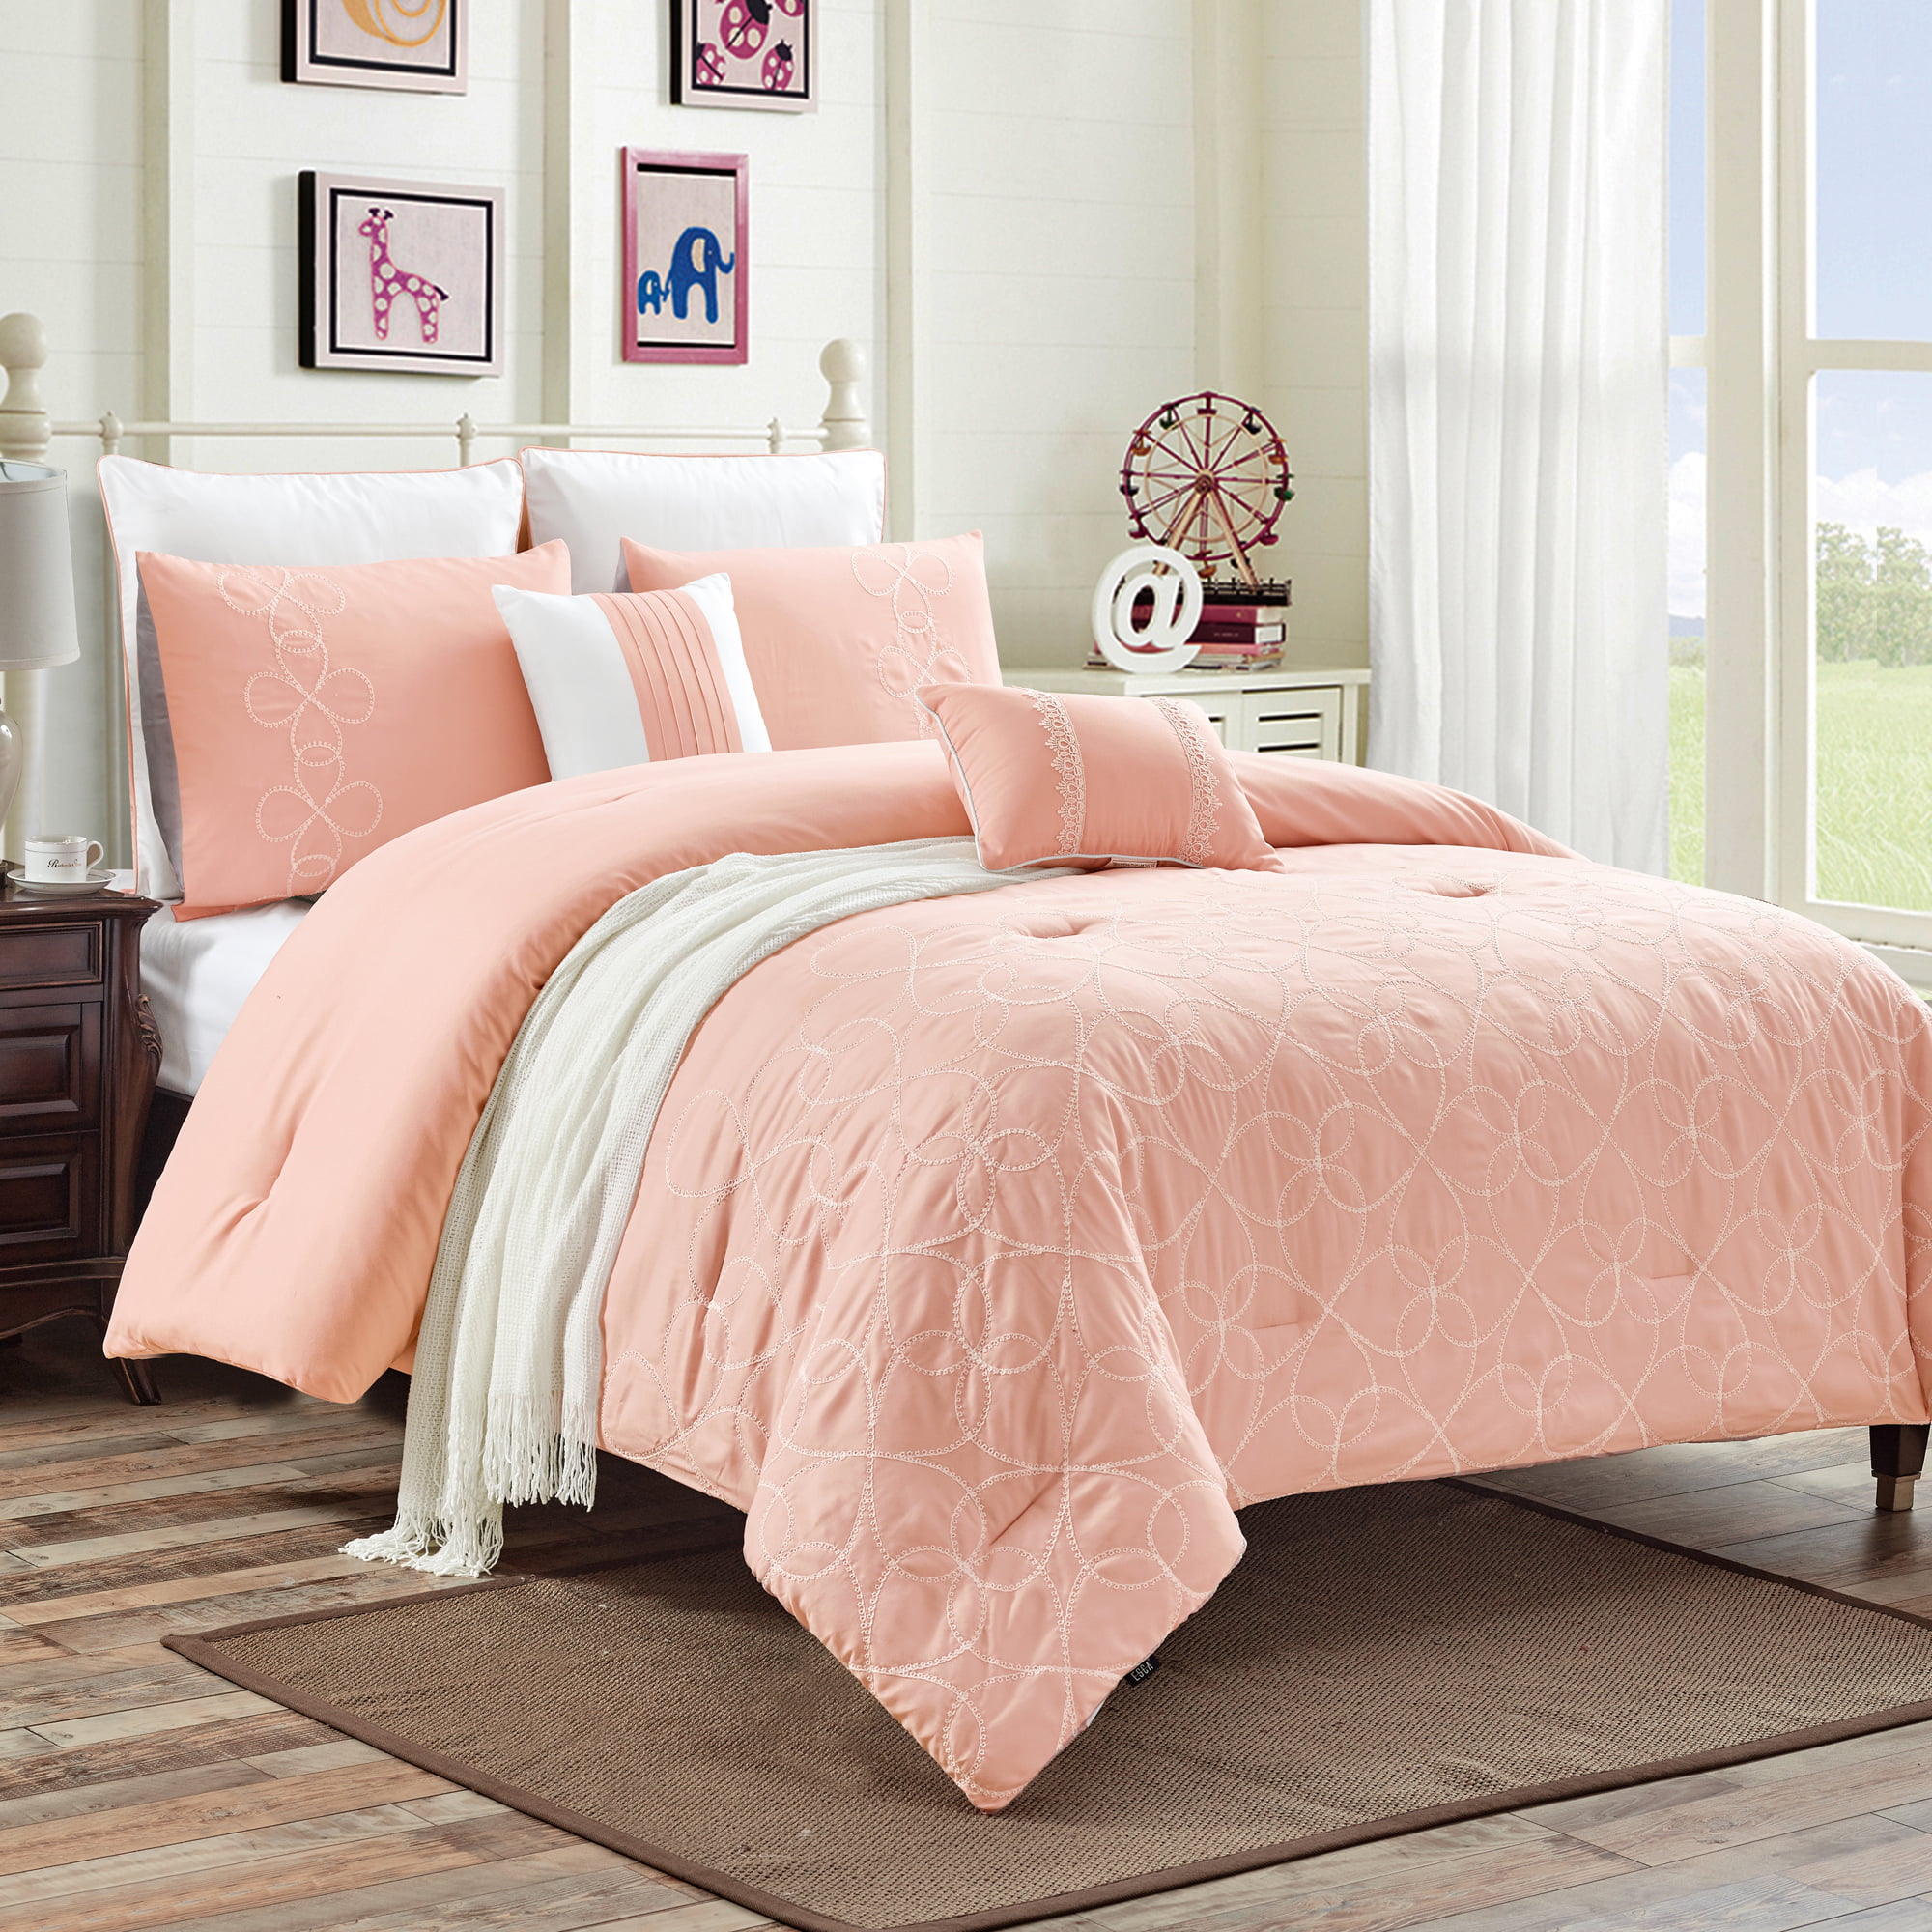 king bedding sets clearance